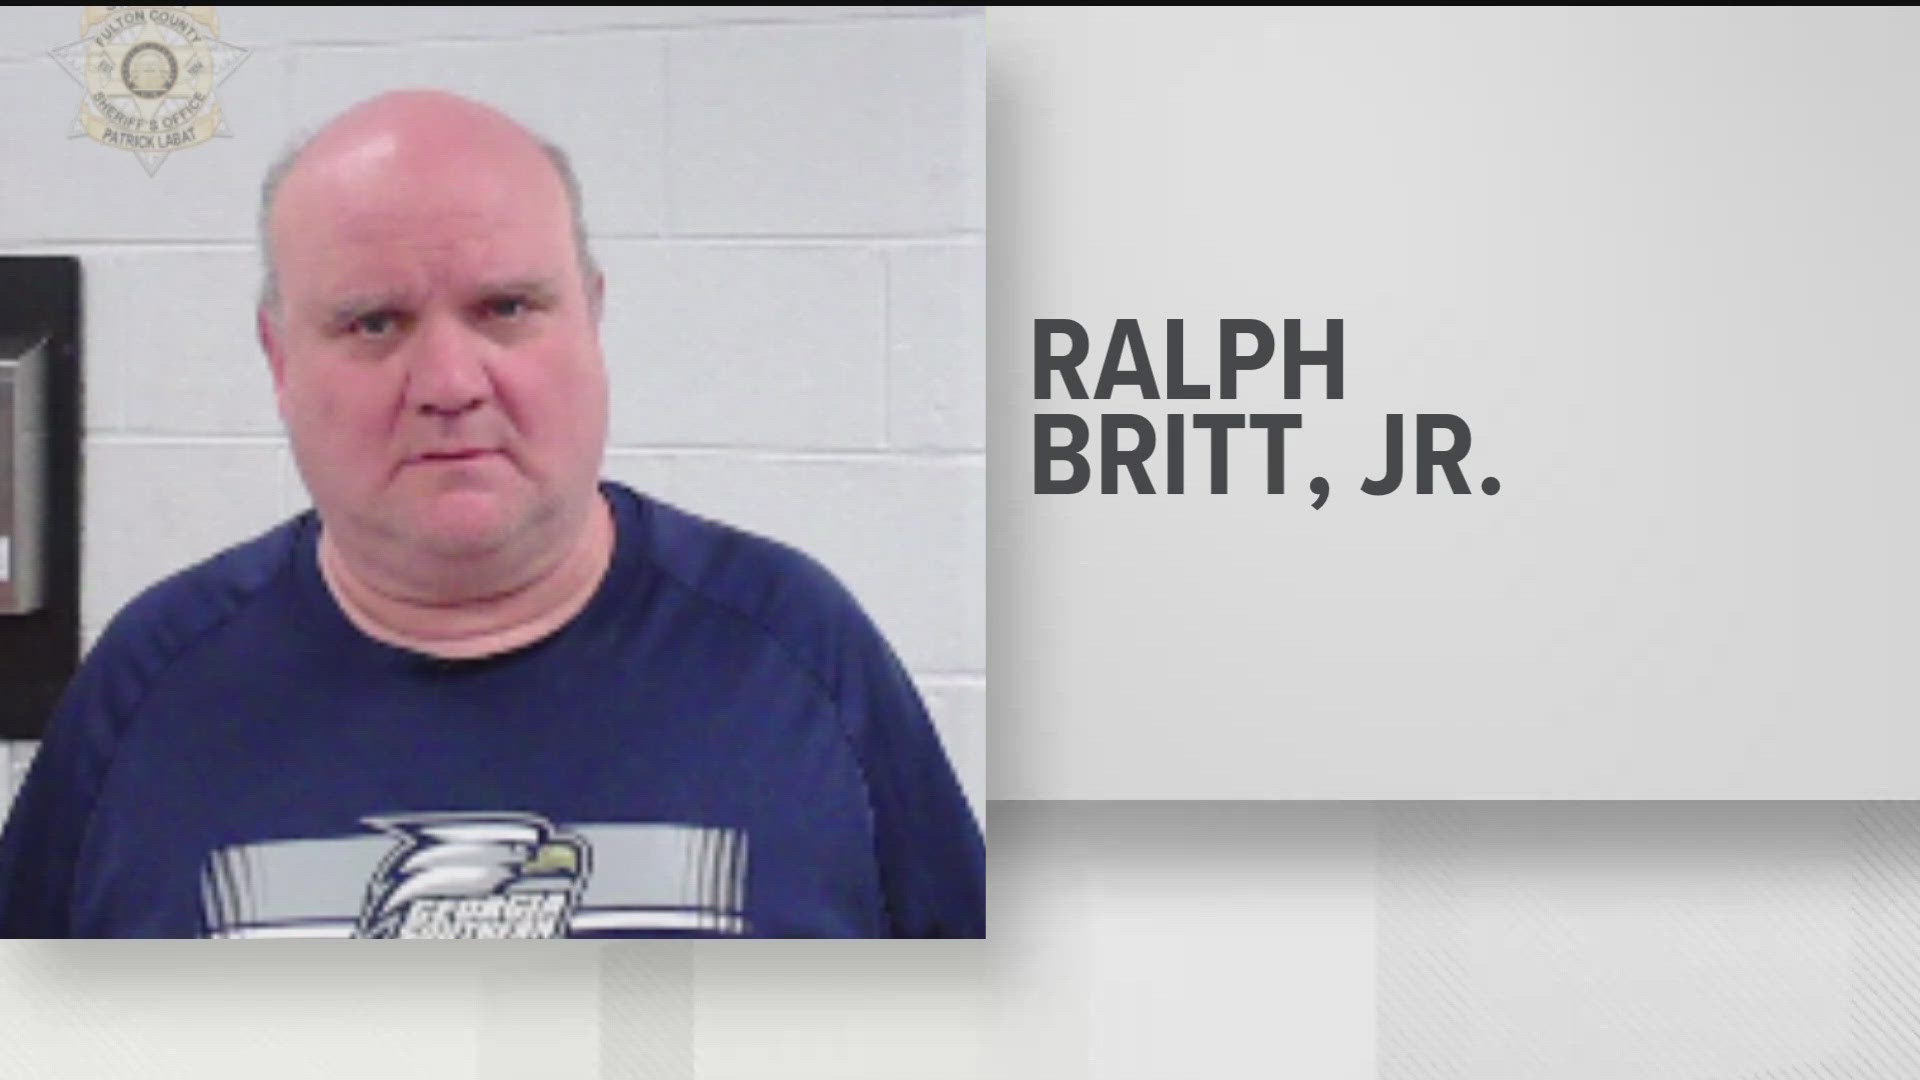 Roswell Police said Ralph Britt Jr., 59, worked at the church around children for the last 20 years.